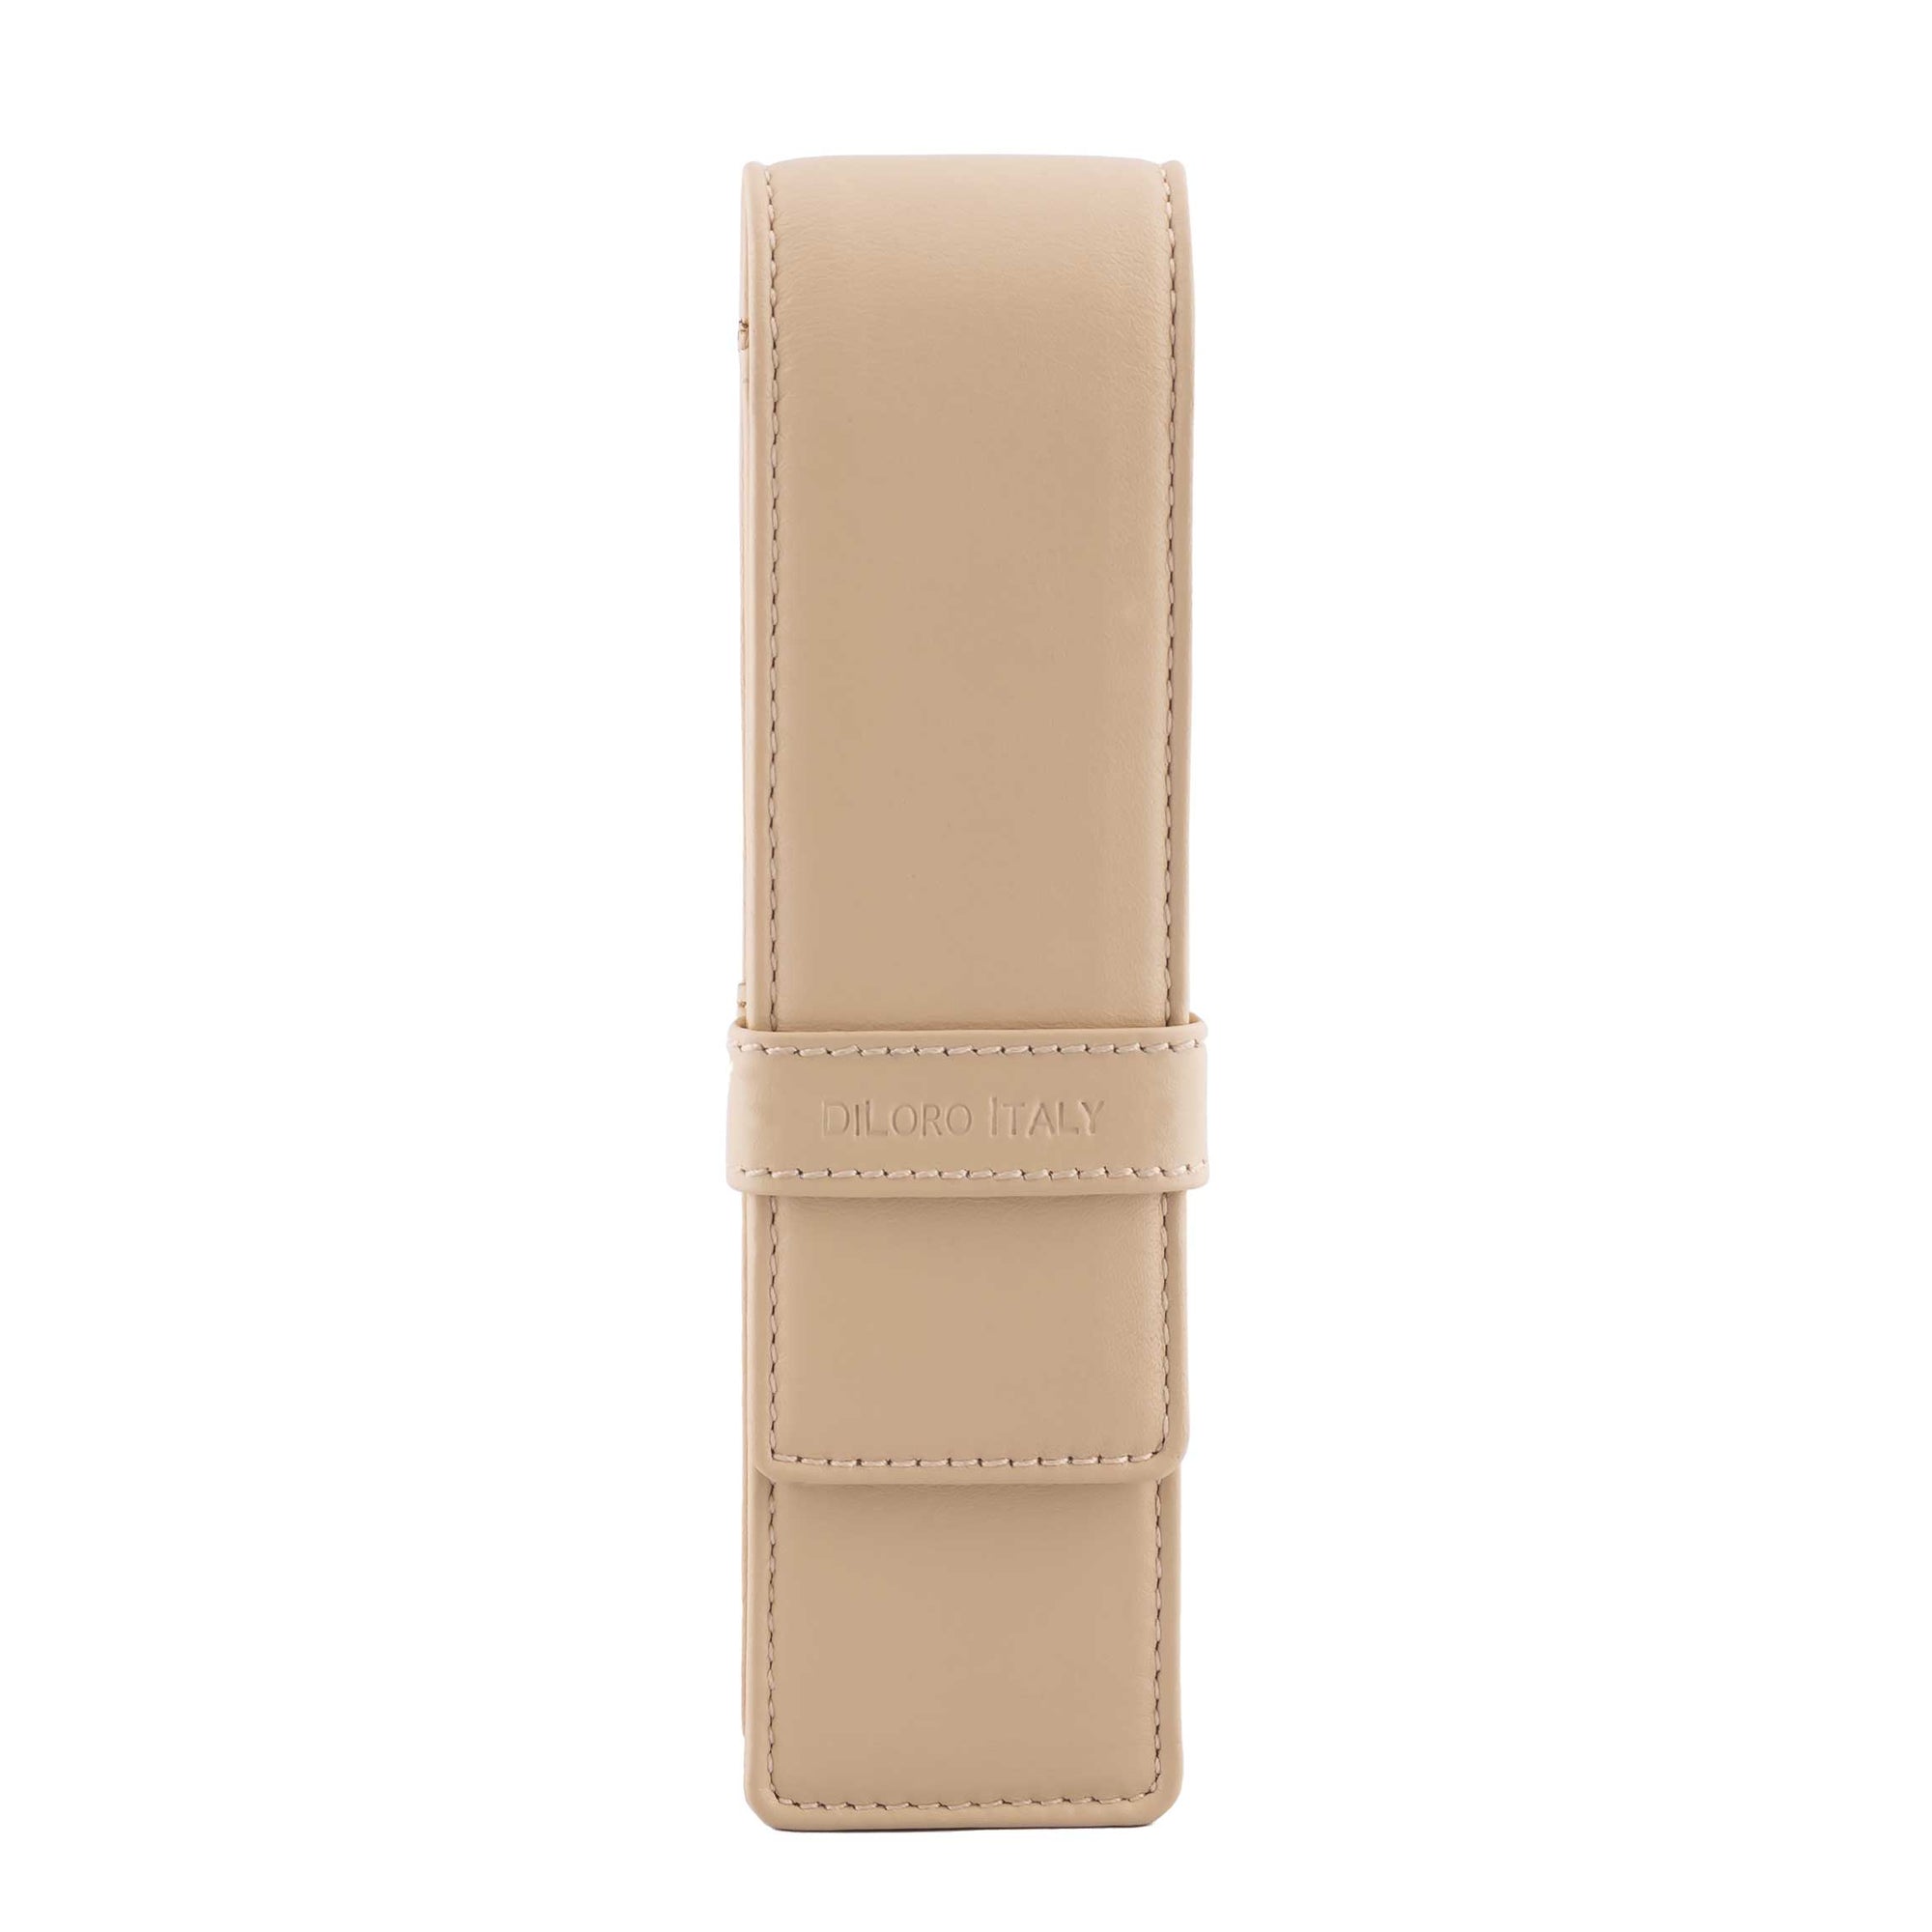 DiLoro Double Pen Case Holder in Top Quality, Full Grain Nappa Leather - Beige (Off White), Front